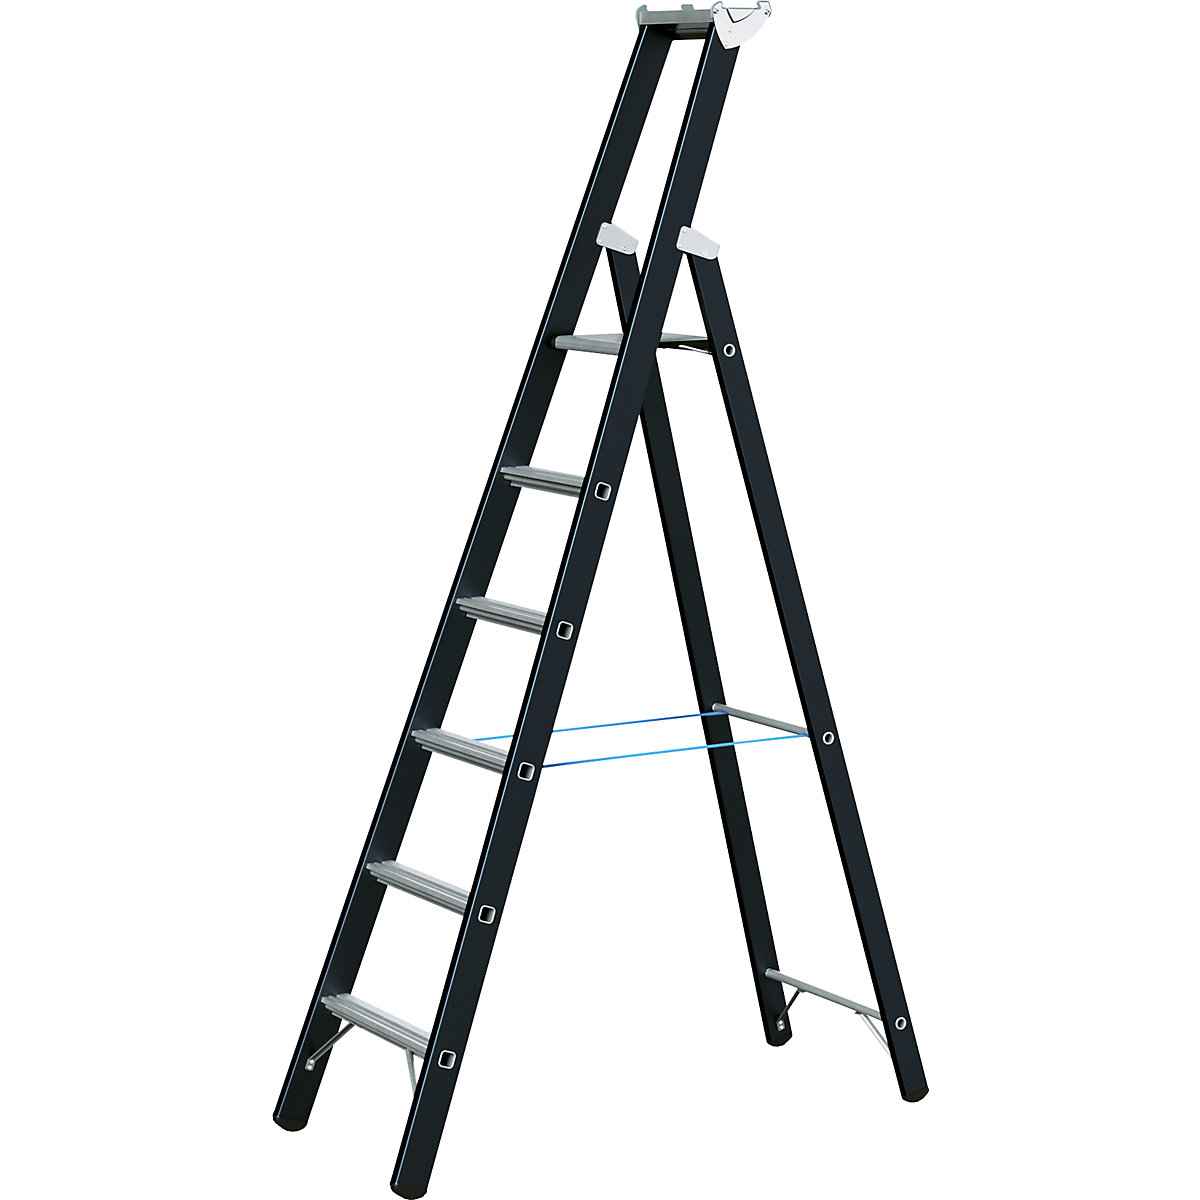 Heavy duty step ladder – ZARGES, single sided, 6 rungs incl. platform-6